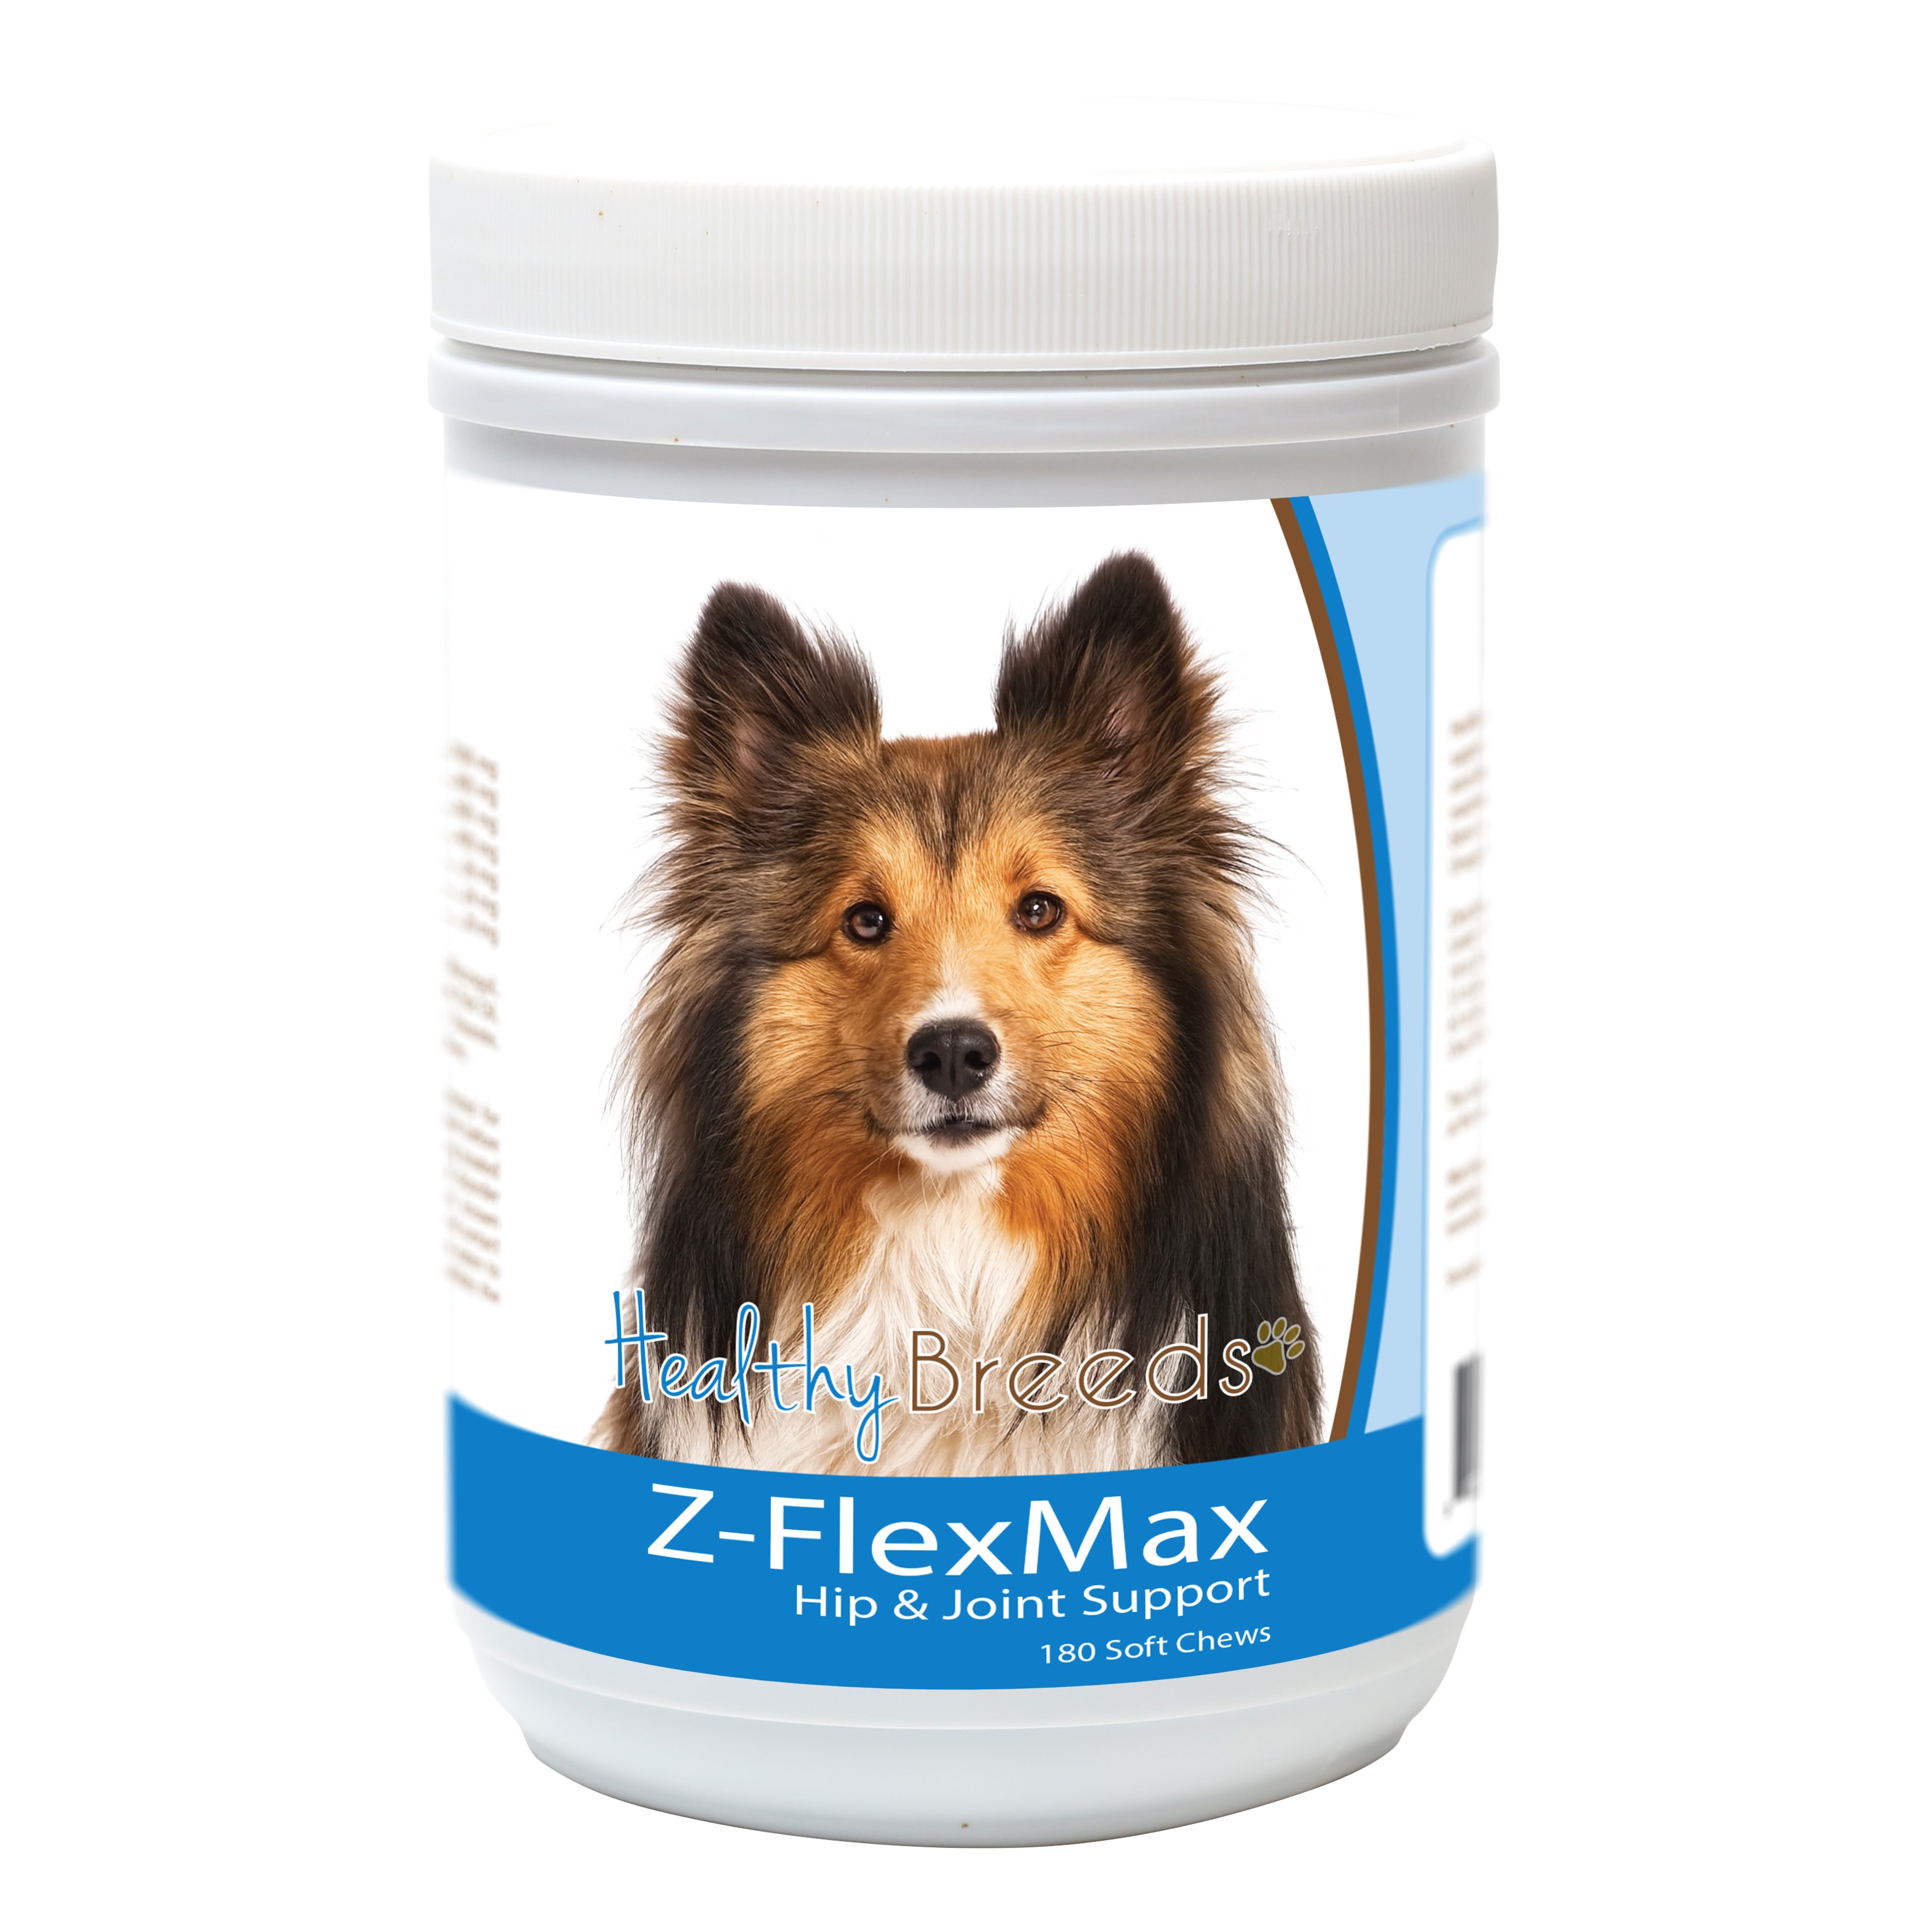 Shetland Sheepdog Z-Flex Max Dog Hip and Joint Support 180 Count